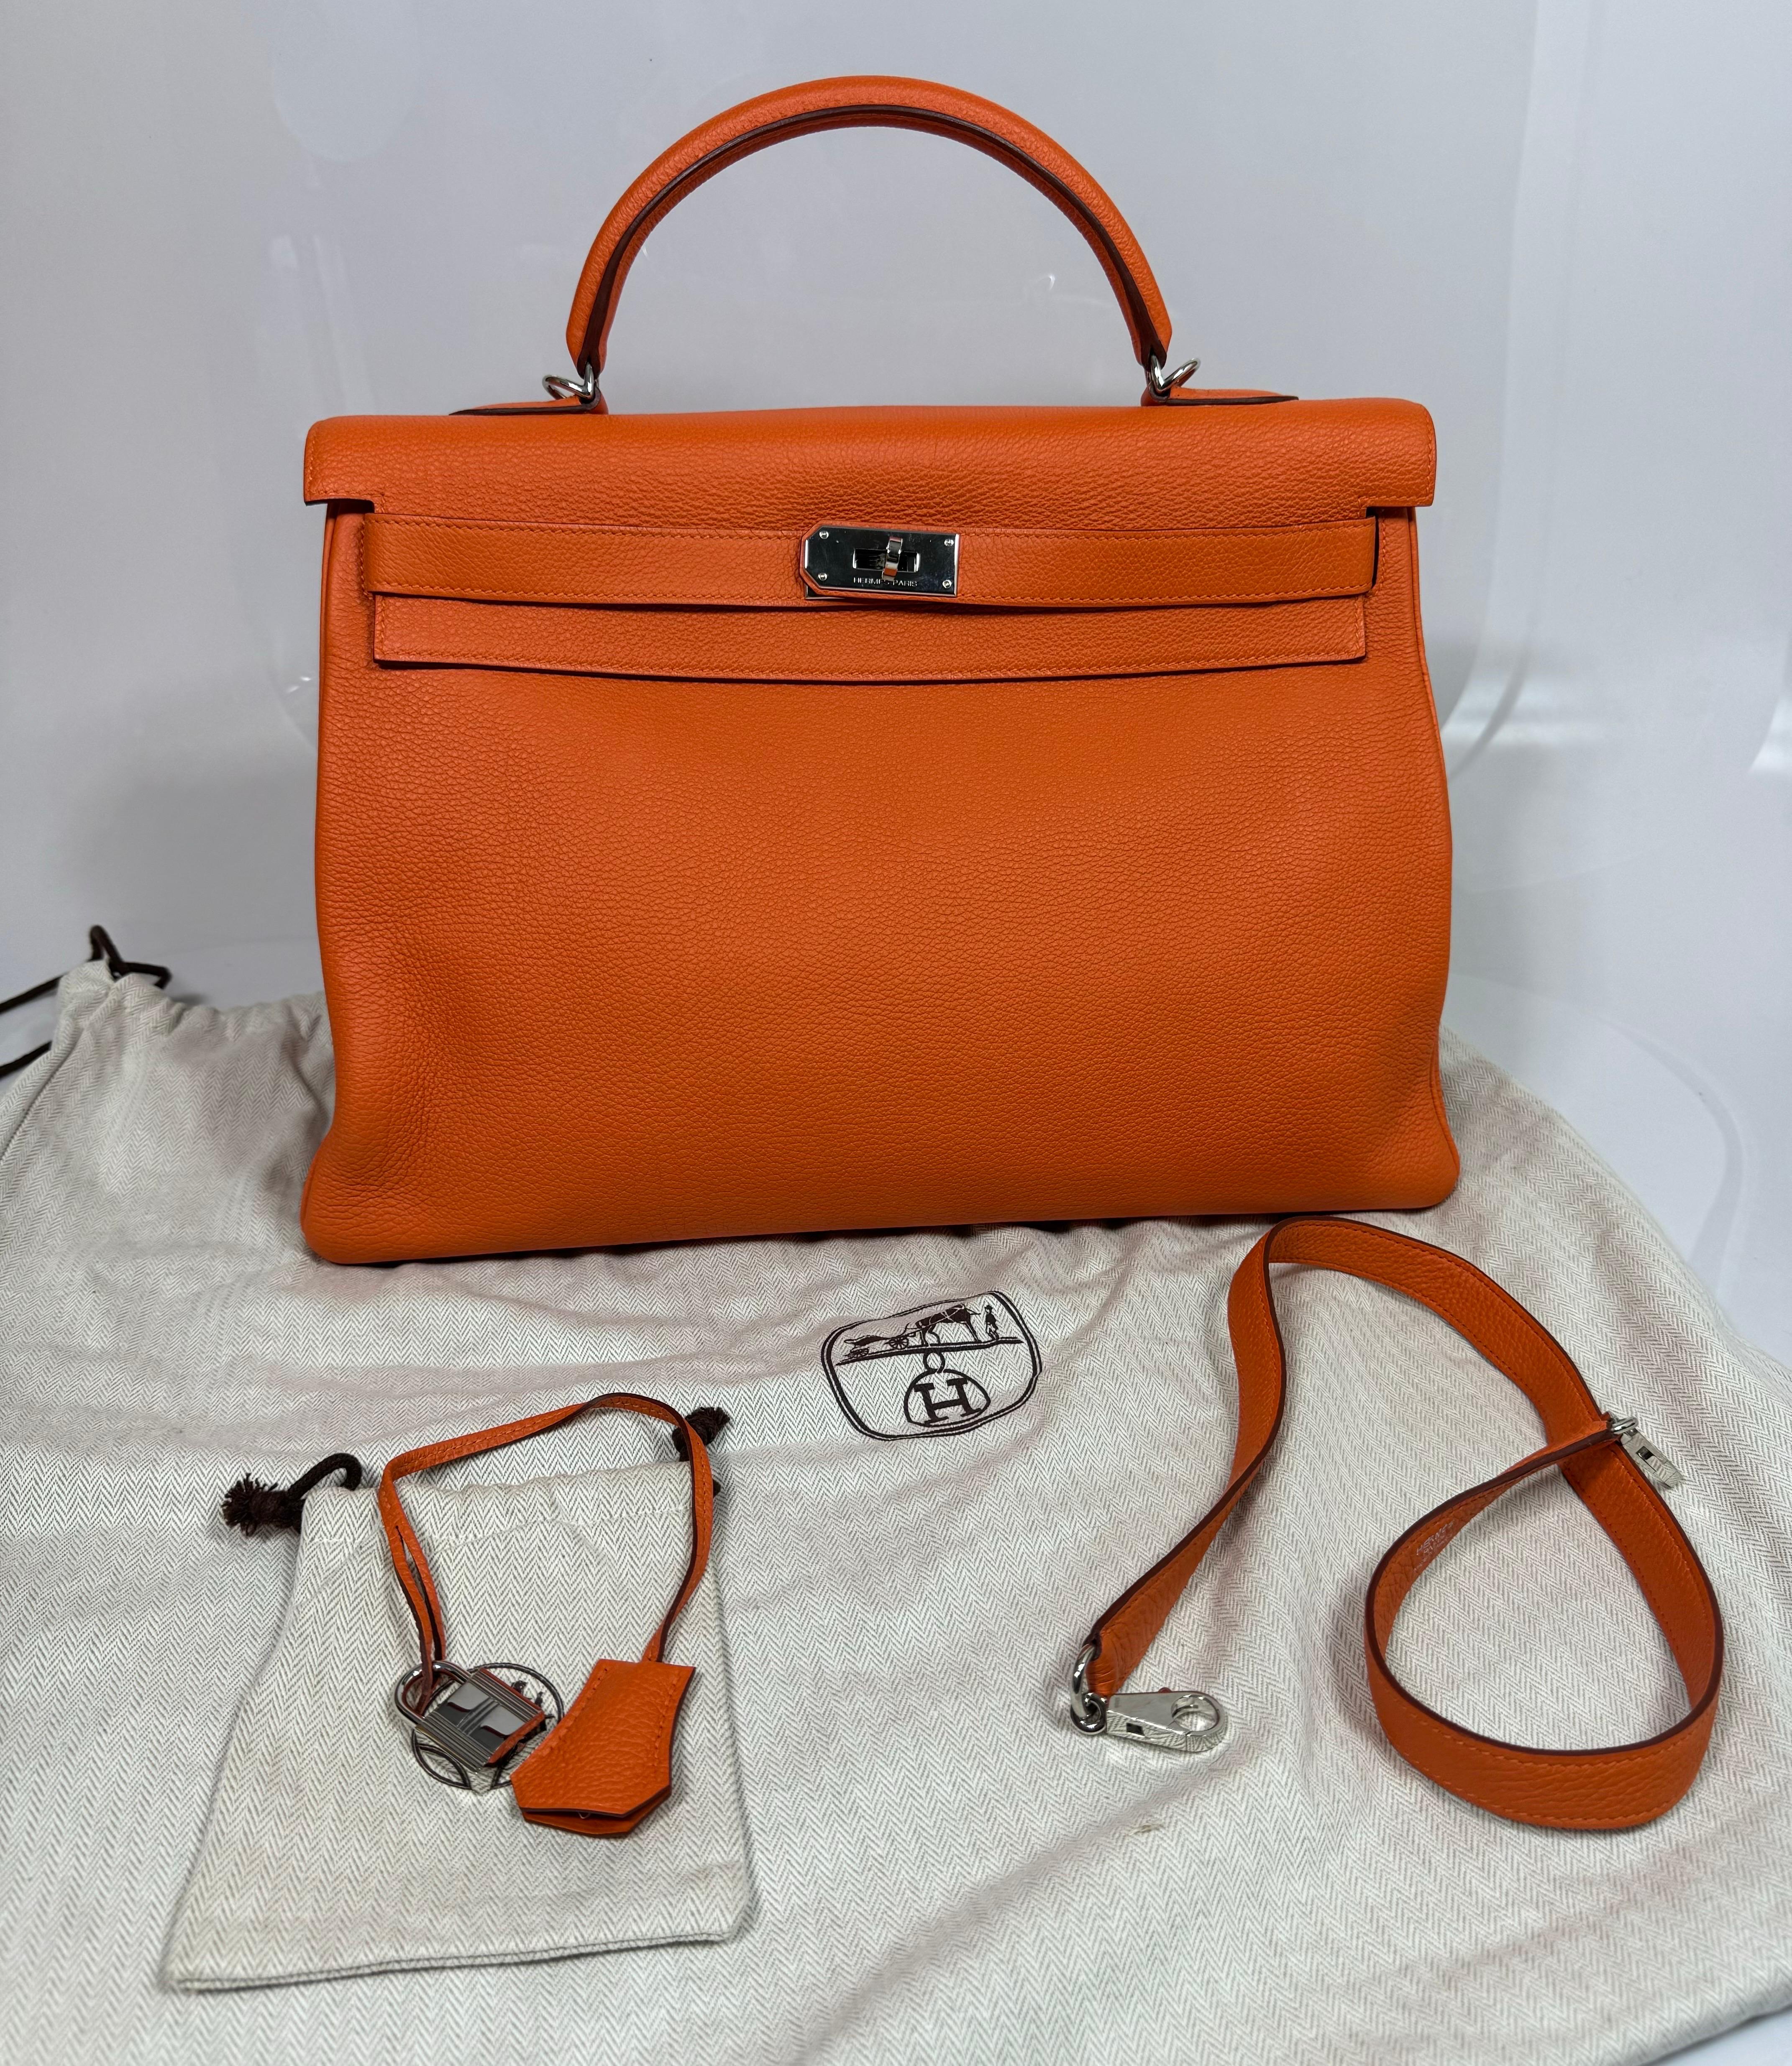 Even in the world of ultra-luxury handbags, Hermes is more adored by the fortunate few than any other. The Hermes Kelly was named after Grace Kelly was photographed carrying the Hermes bag. Unlike other handbags, a single craftsman works on one bag